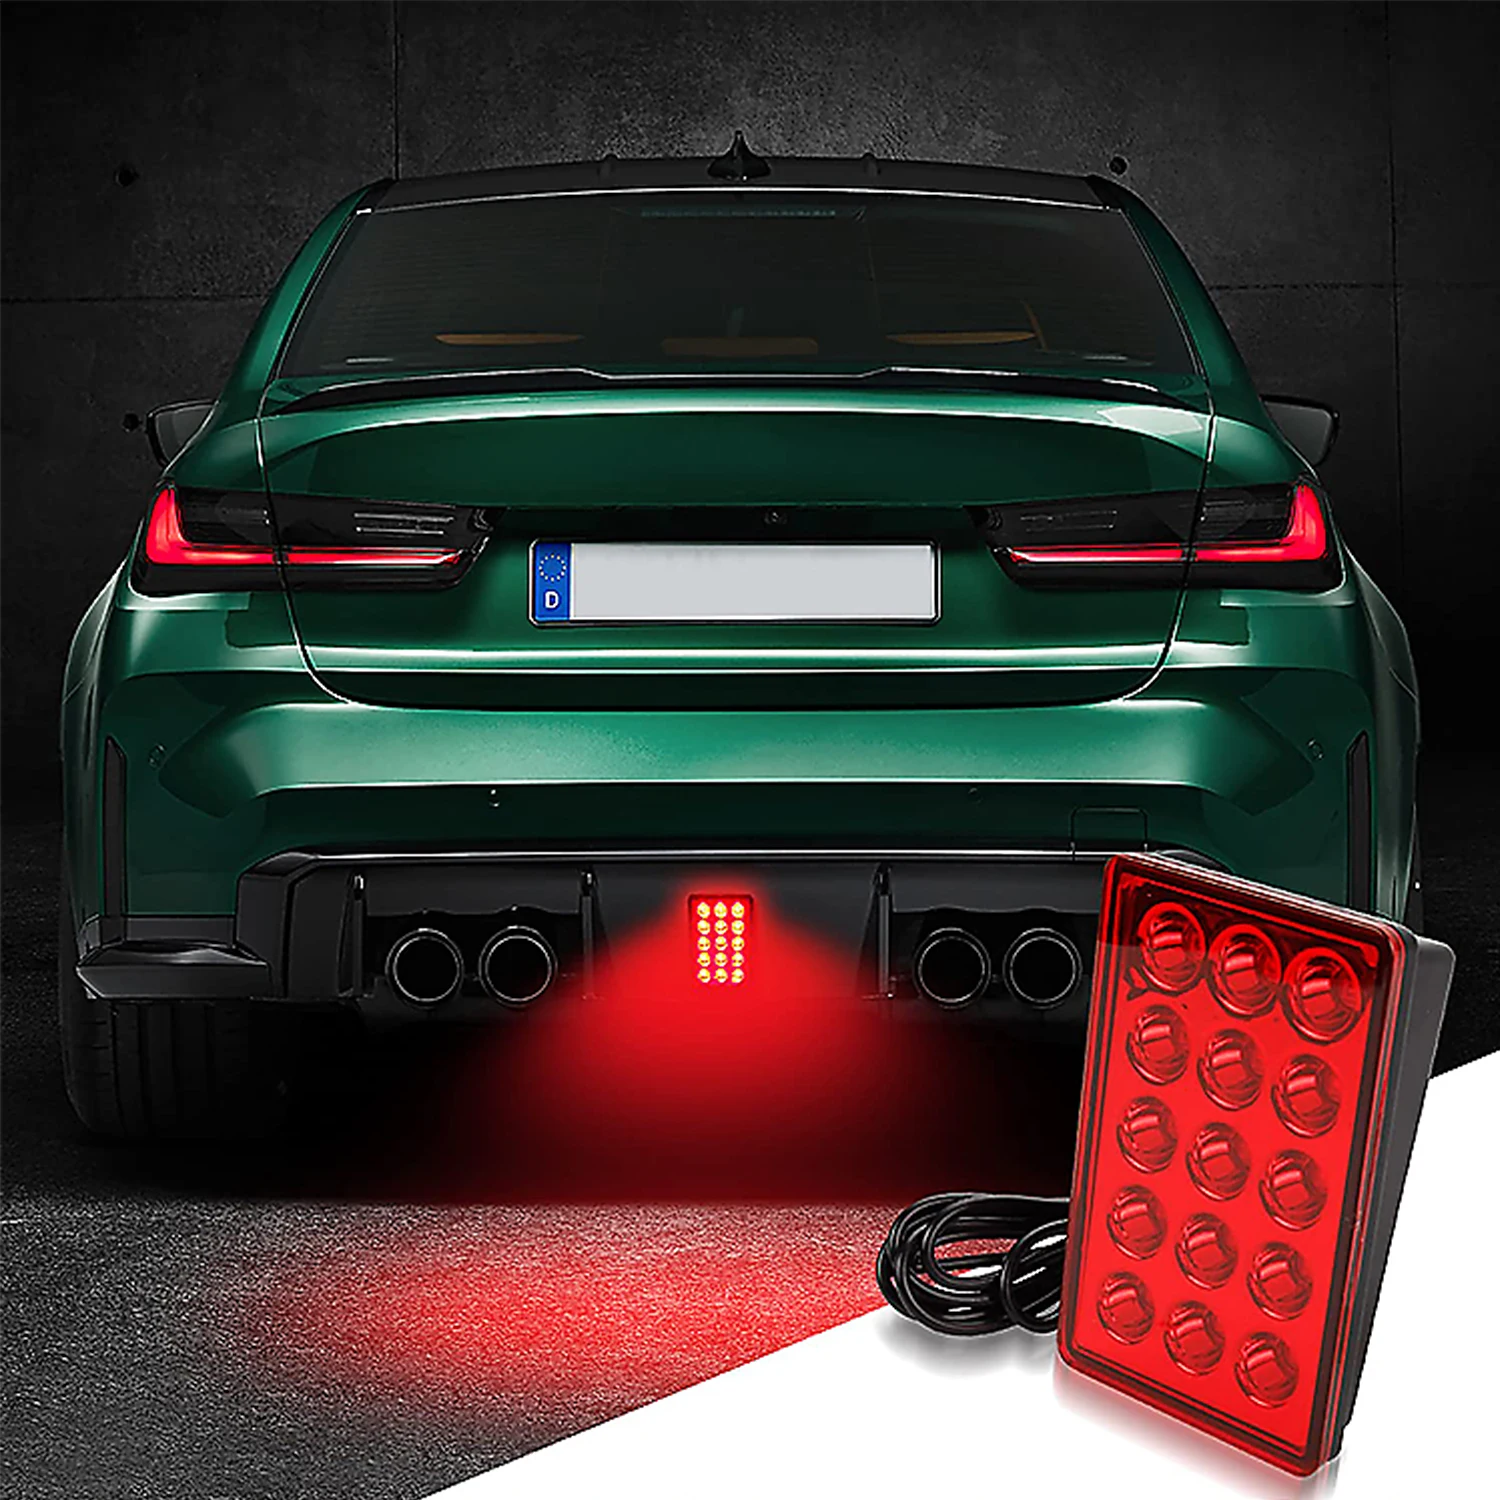 f1-style-led-brake-pilot-lights-12v-15led-rear-tail-lights-auto-flash-warning-reverse-stop-safety-signal-lamps-for-car-suv-moto